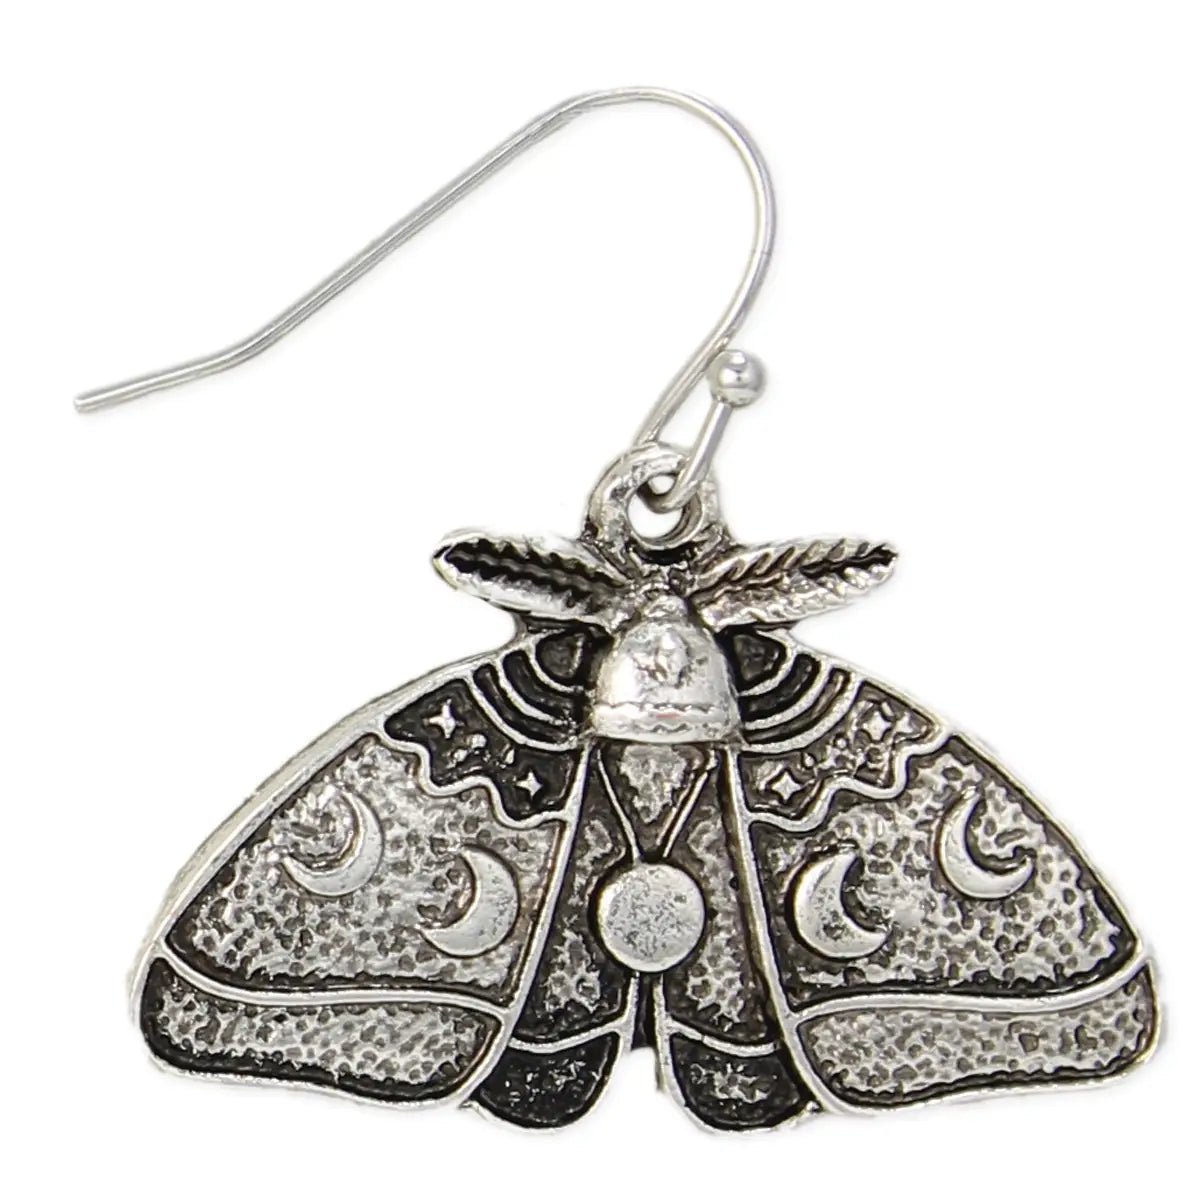 Moon Rise Luna Moth Silver Earrings - ZA77 - The Hare and the Moon